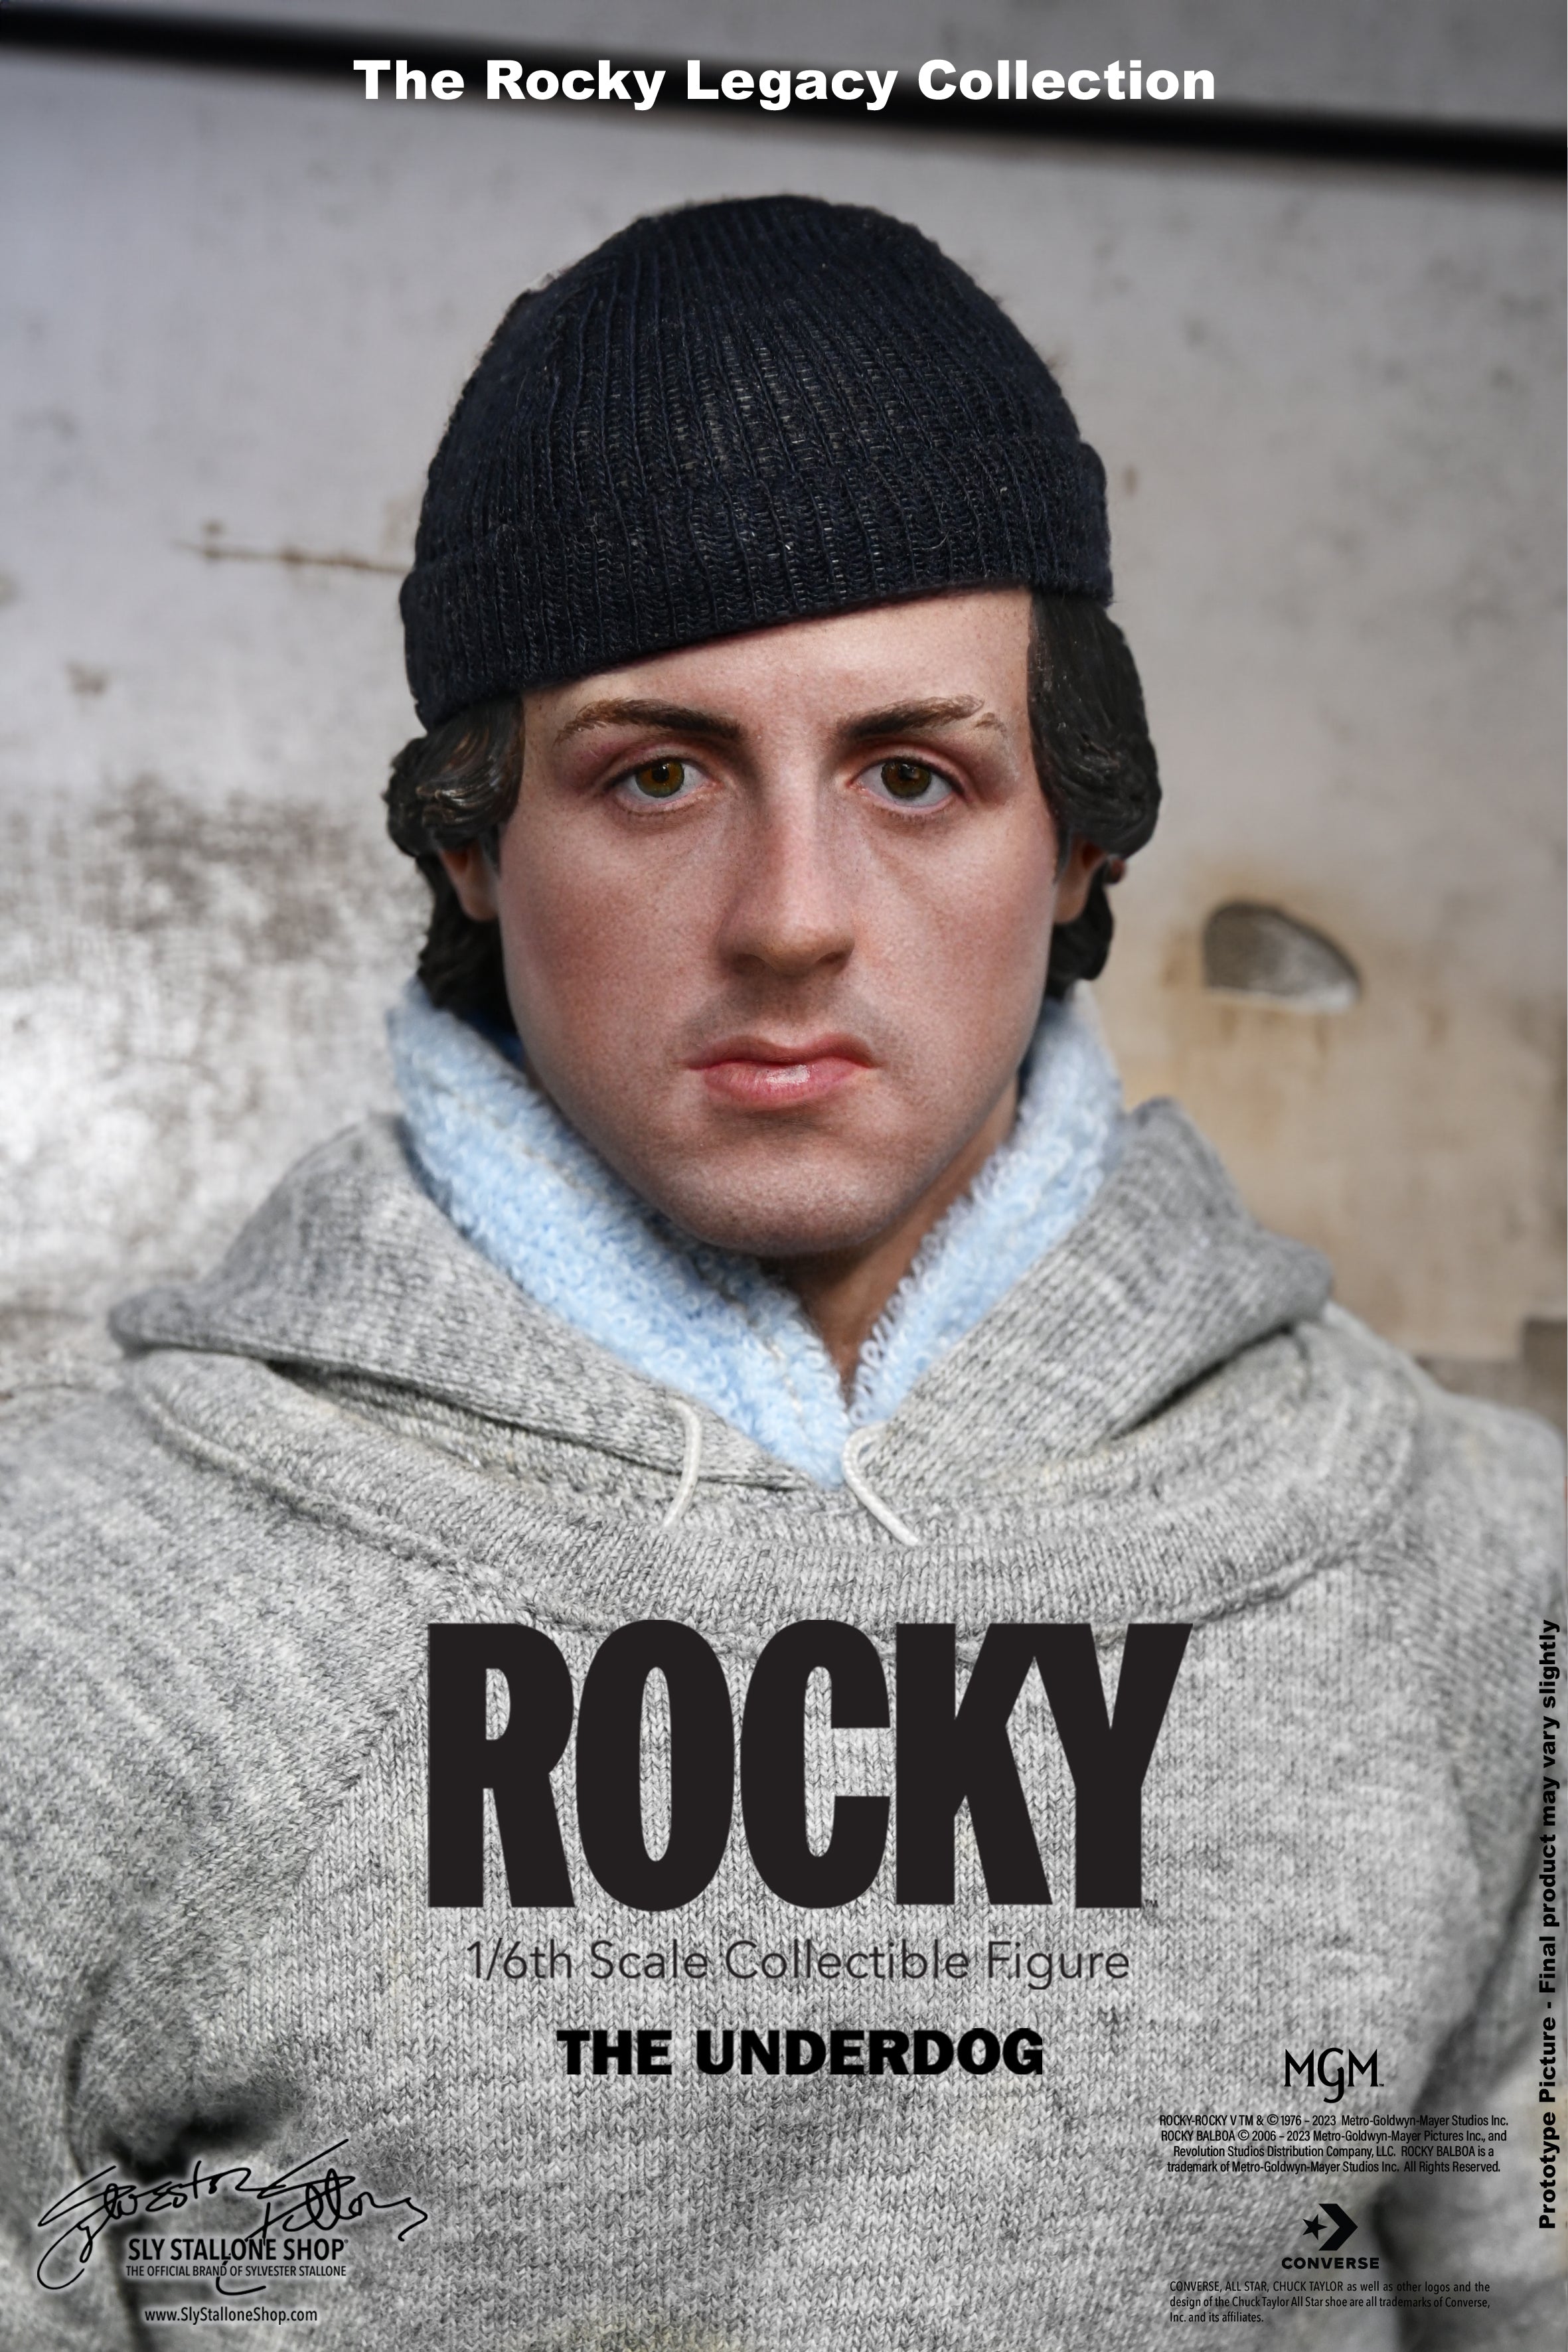 ROCKY "The Underdog" Deluxe Edition Sixth Scale Action Figure PRE ORDER